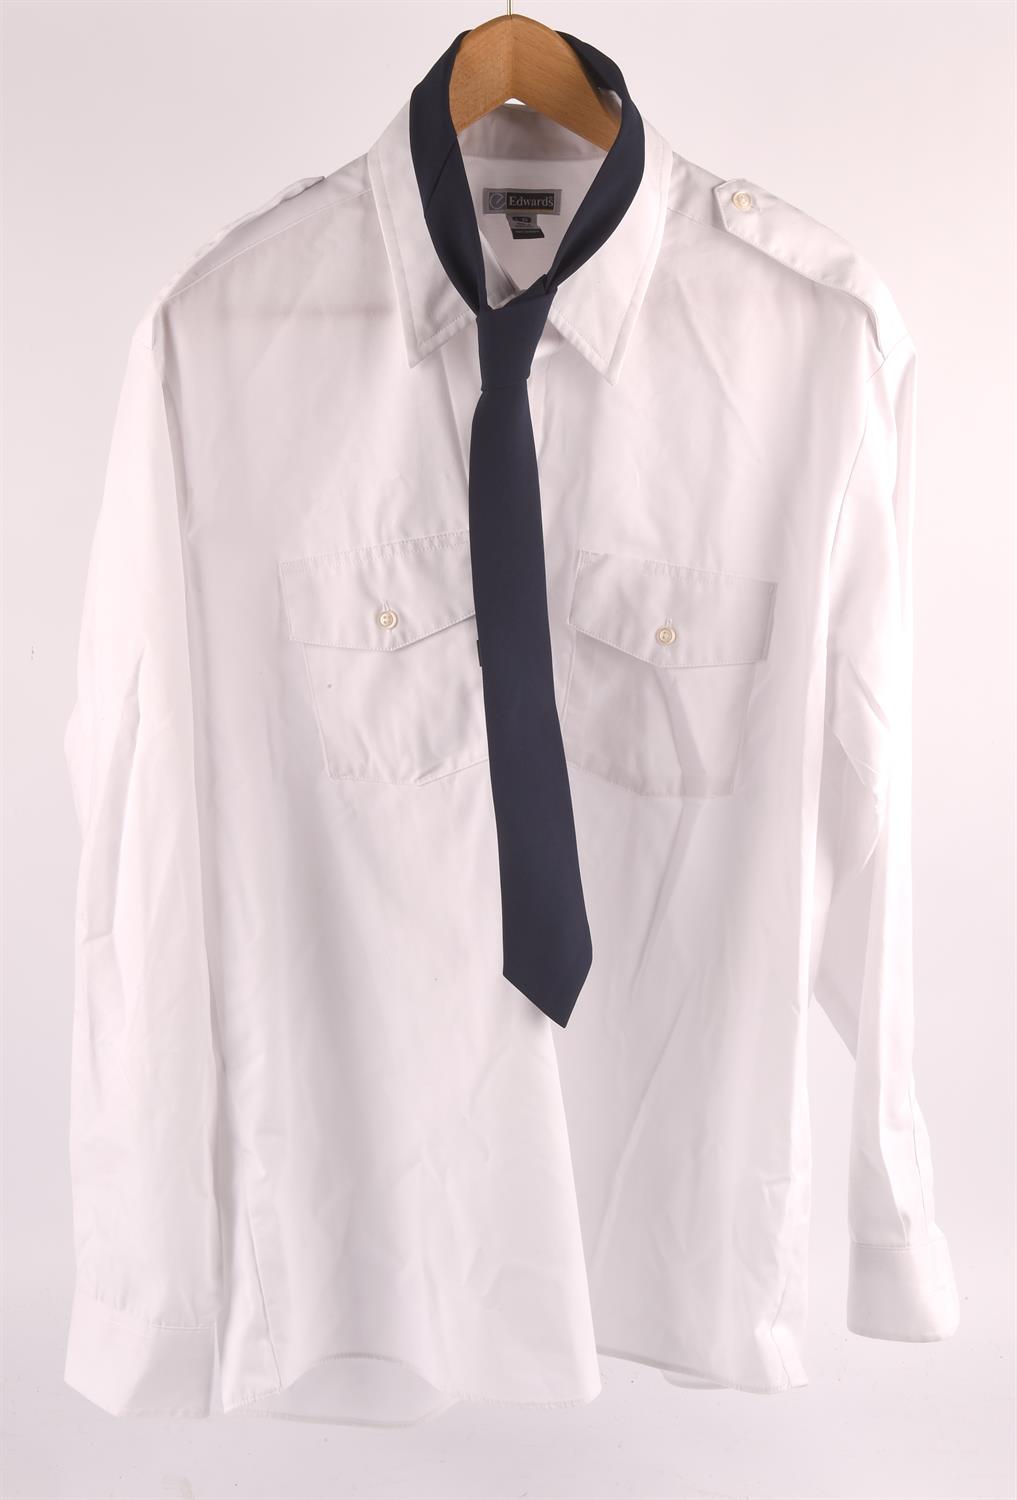 Bullet Train (2022) - NSL Conductor Shirt (Size L35) and Tie, NSL Janitor Cap and a set of 3 NSL